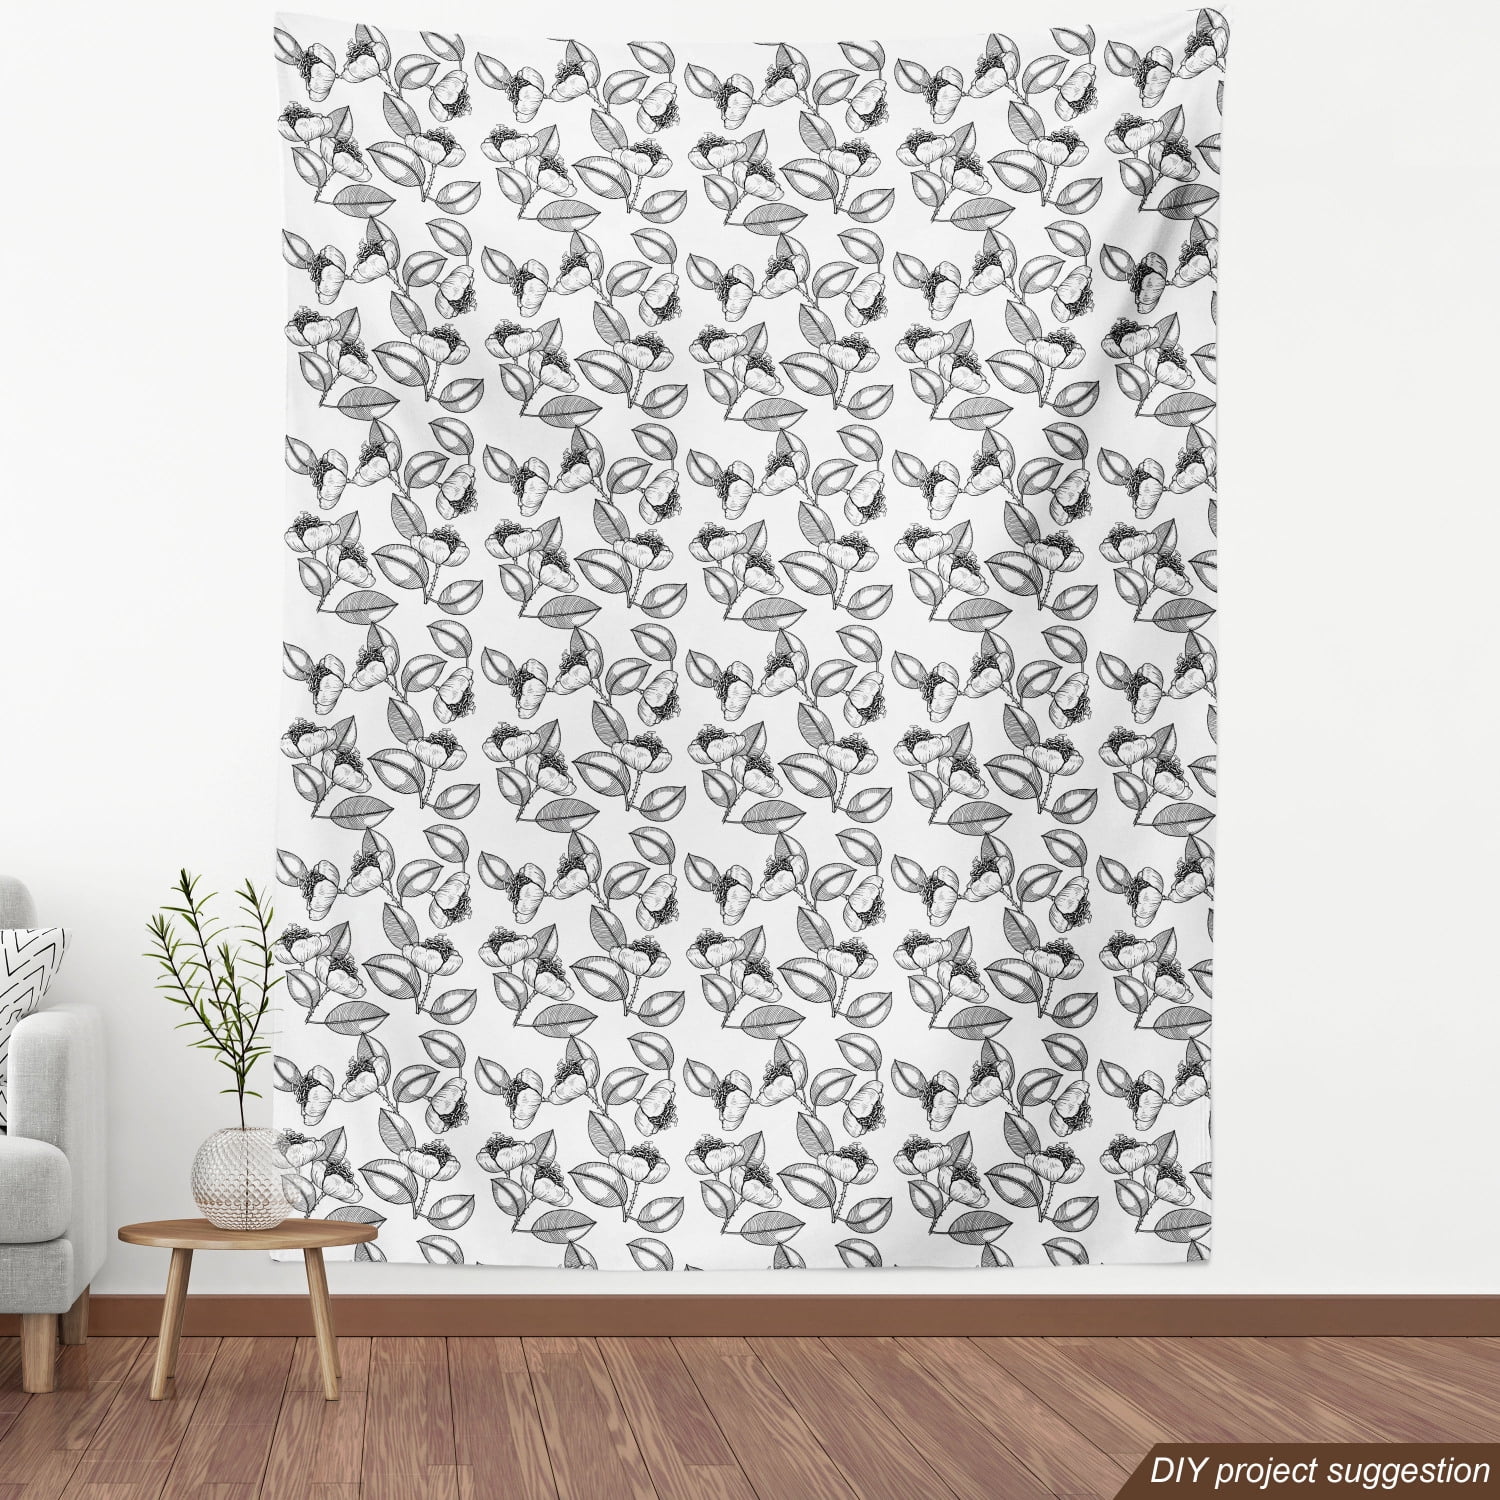 Brown and White Fabric by the Yard, Vintage Illustration of Burgeoning  Buttercup Flowers Garden Plants, Upholstery Fabric for Dining Chairs Home  Decor Accents, 1 Yard, Pale Brown White by Ambesonne 